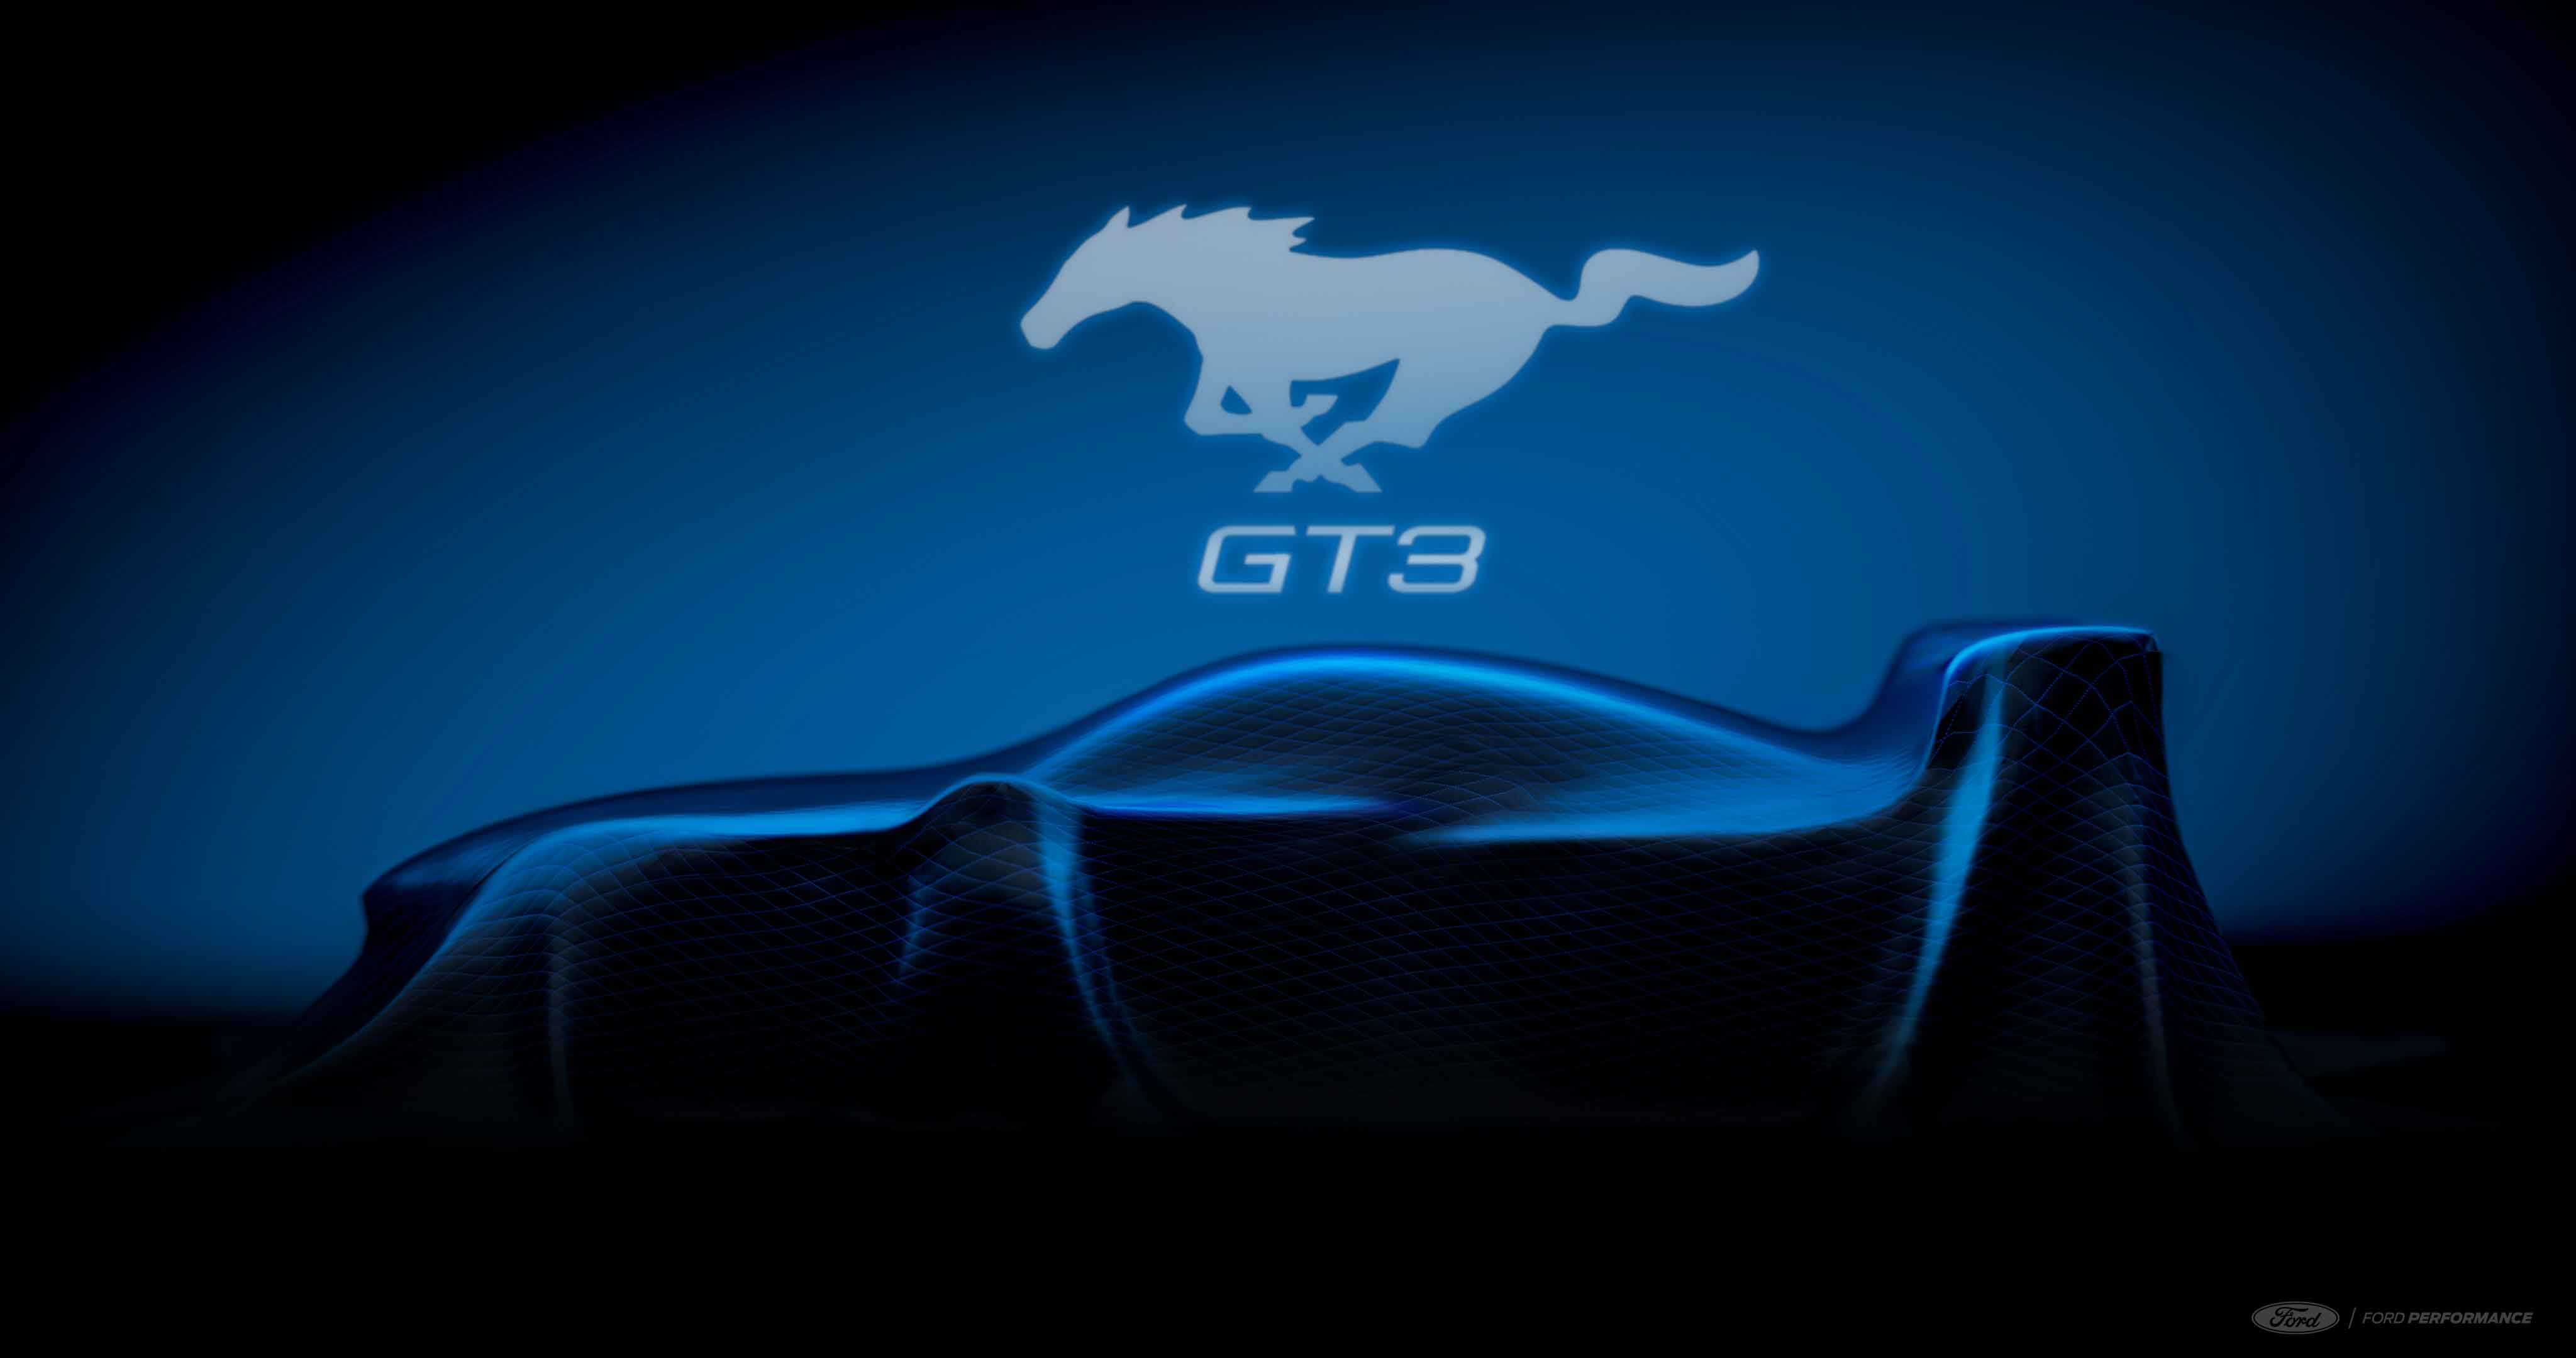 Ford Performance to Develop Mustang GT3 Race Car to Compete Globally